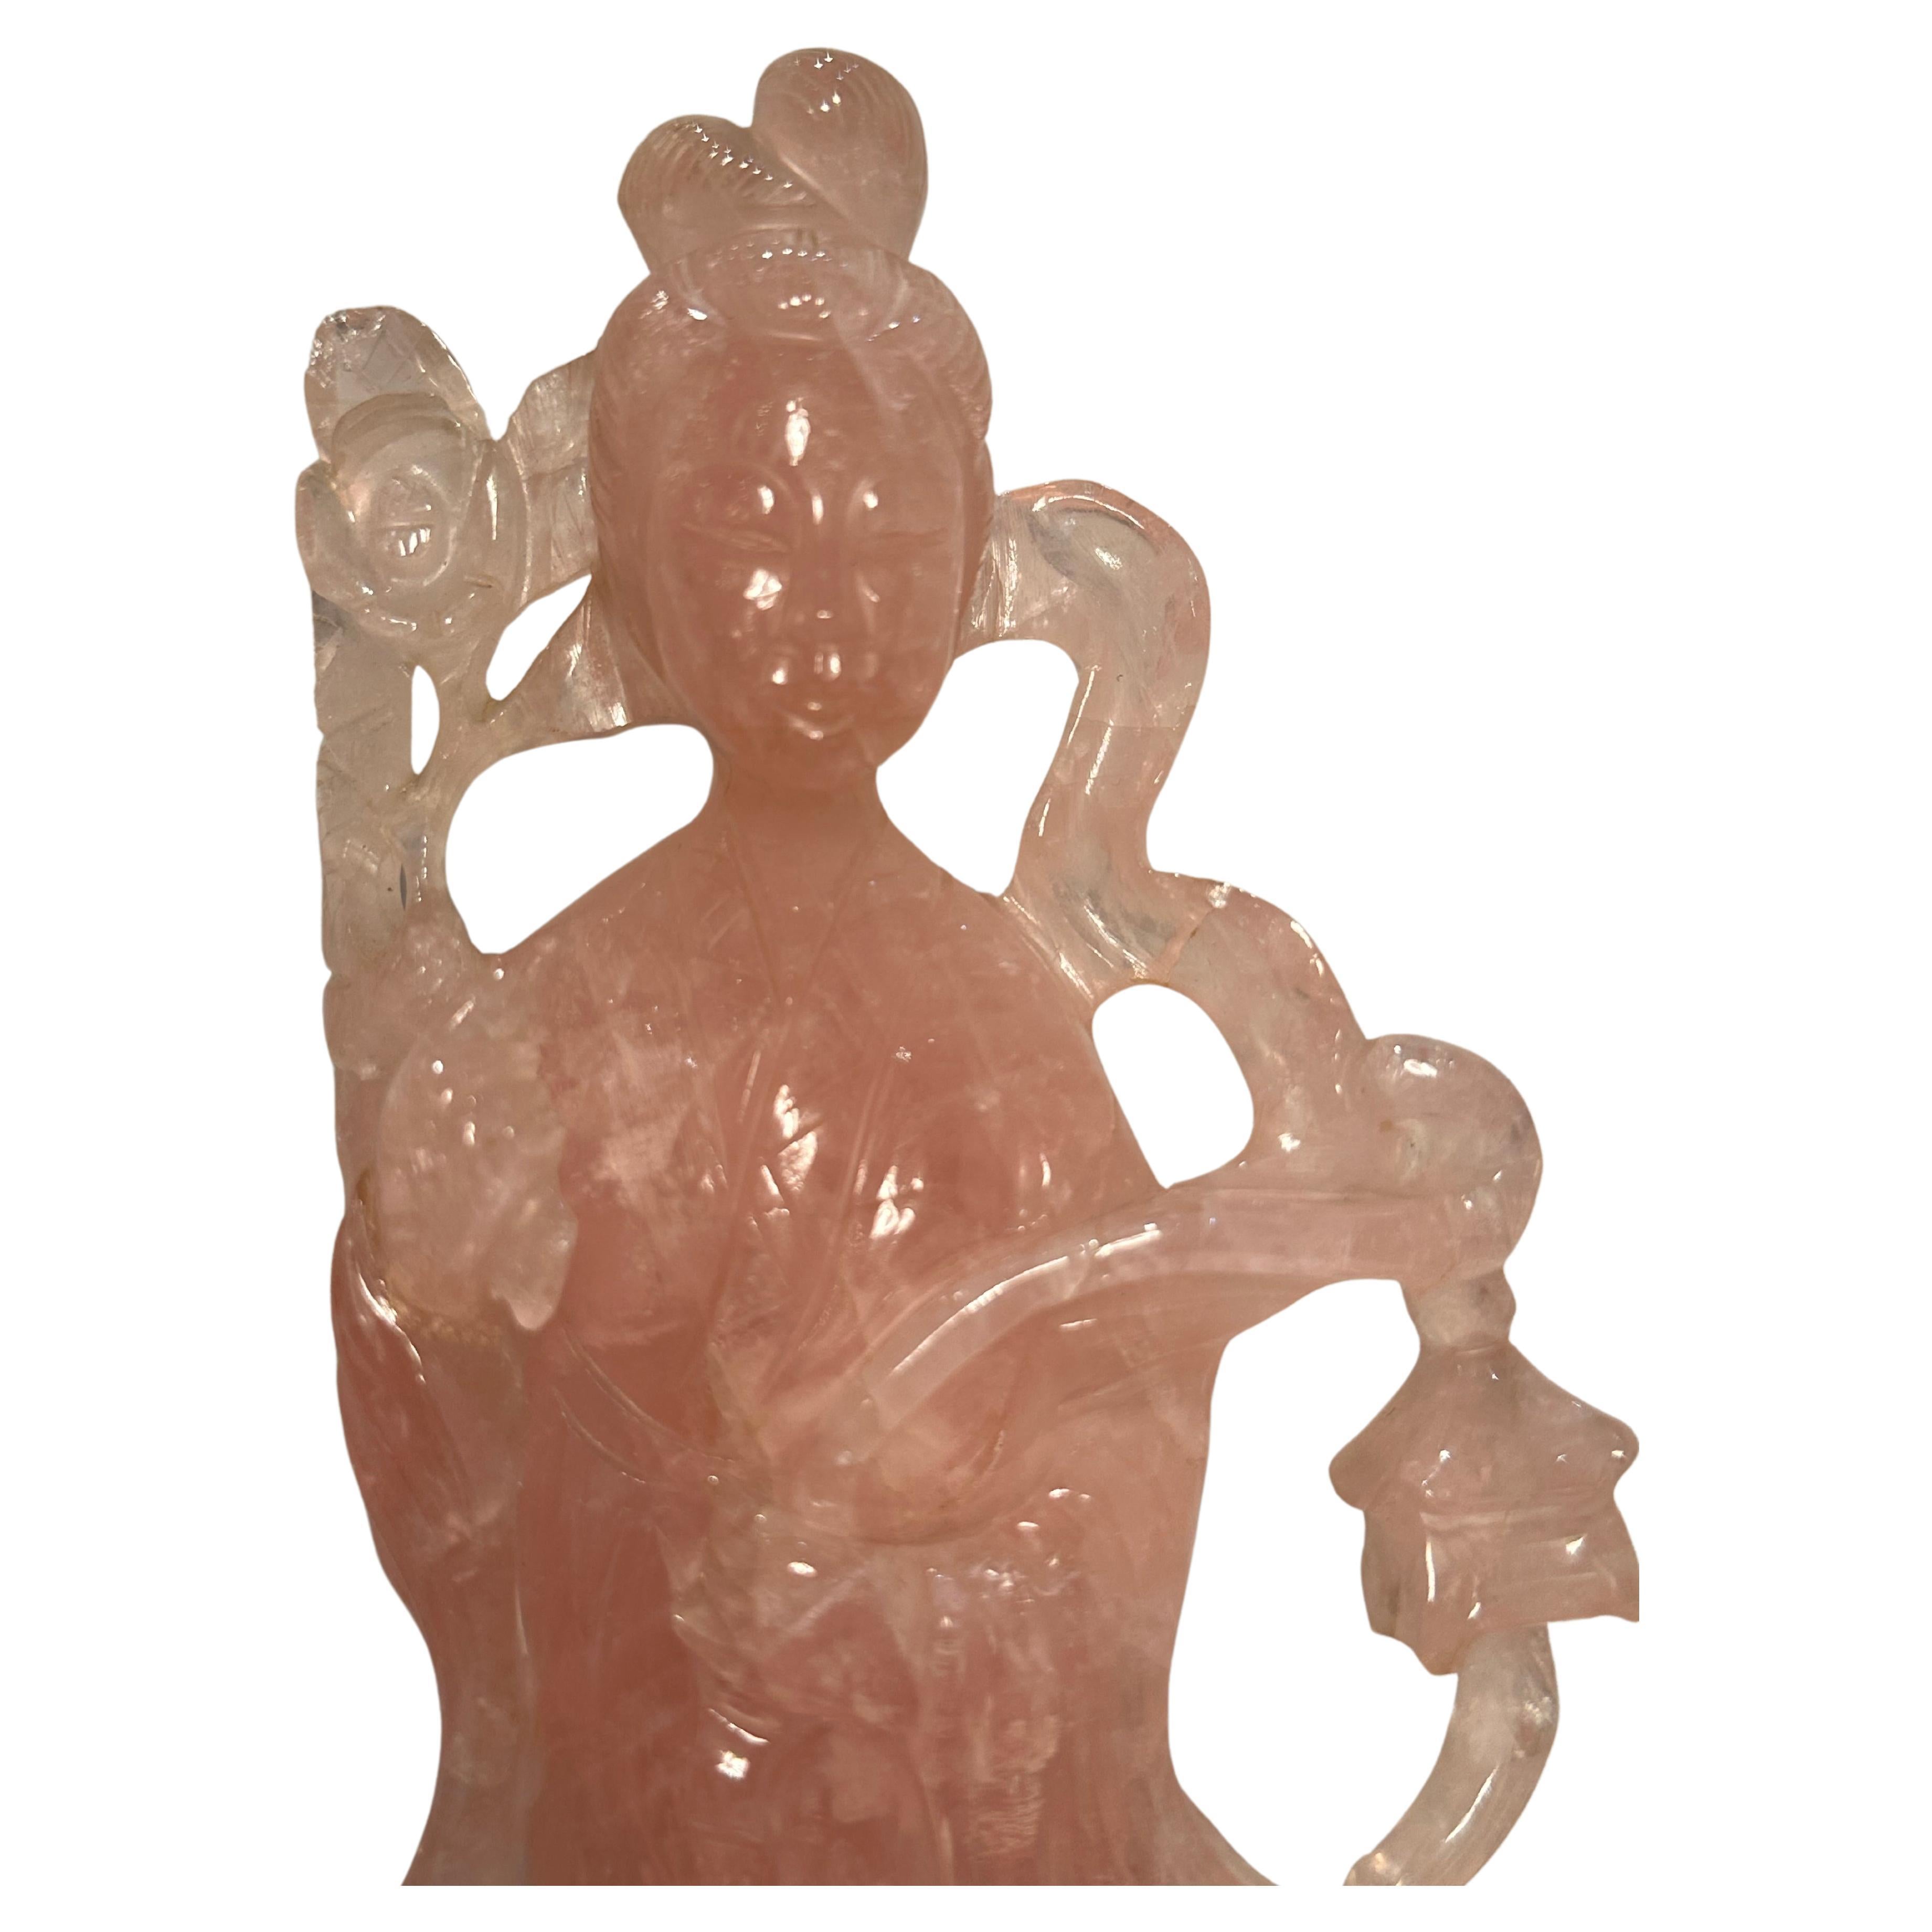 Exquisitely hand made and hand carved pink rose quartz figurine of the goddess Quan Yin.  She is depicted holding a festoon of lotus blossoms and stands on a hand made and hand carved rosewood stand.

Quan Yin also spelled Kwan Yin, Kuanyin or